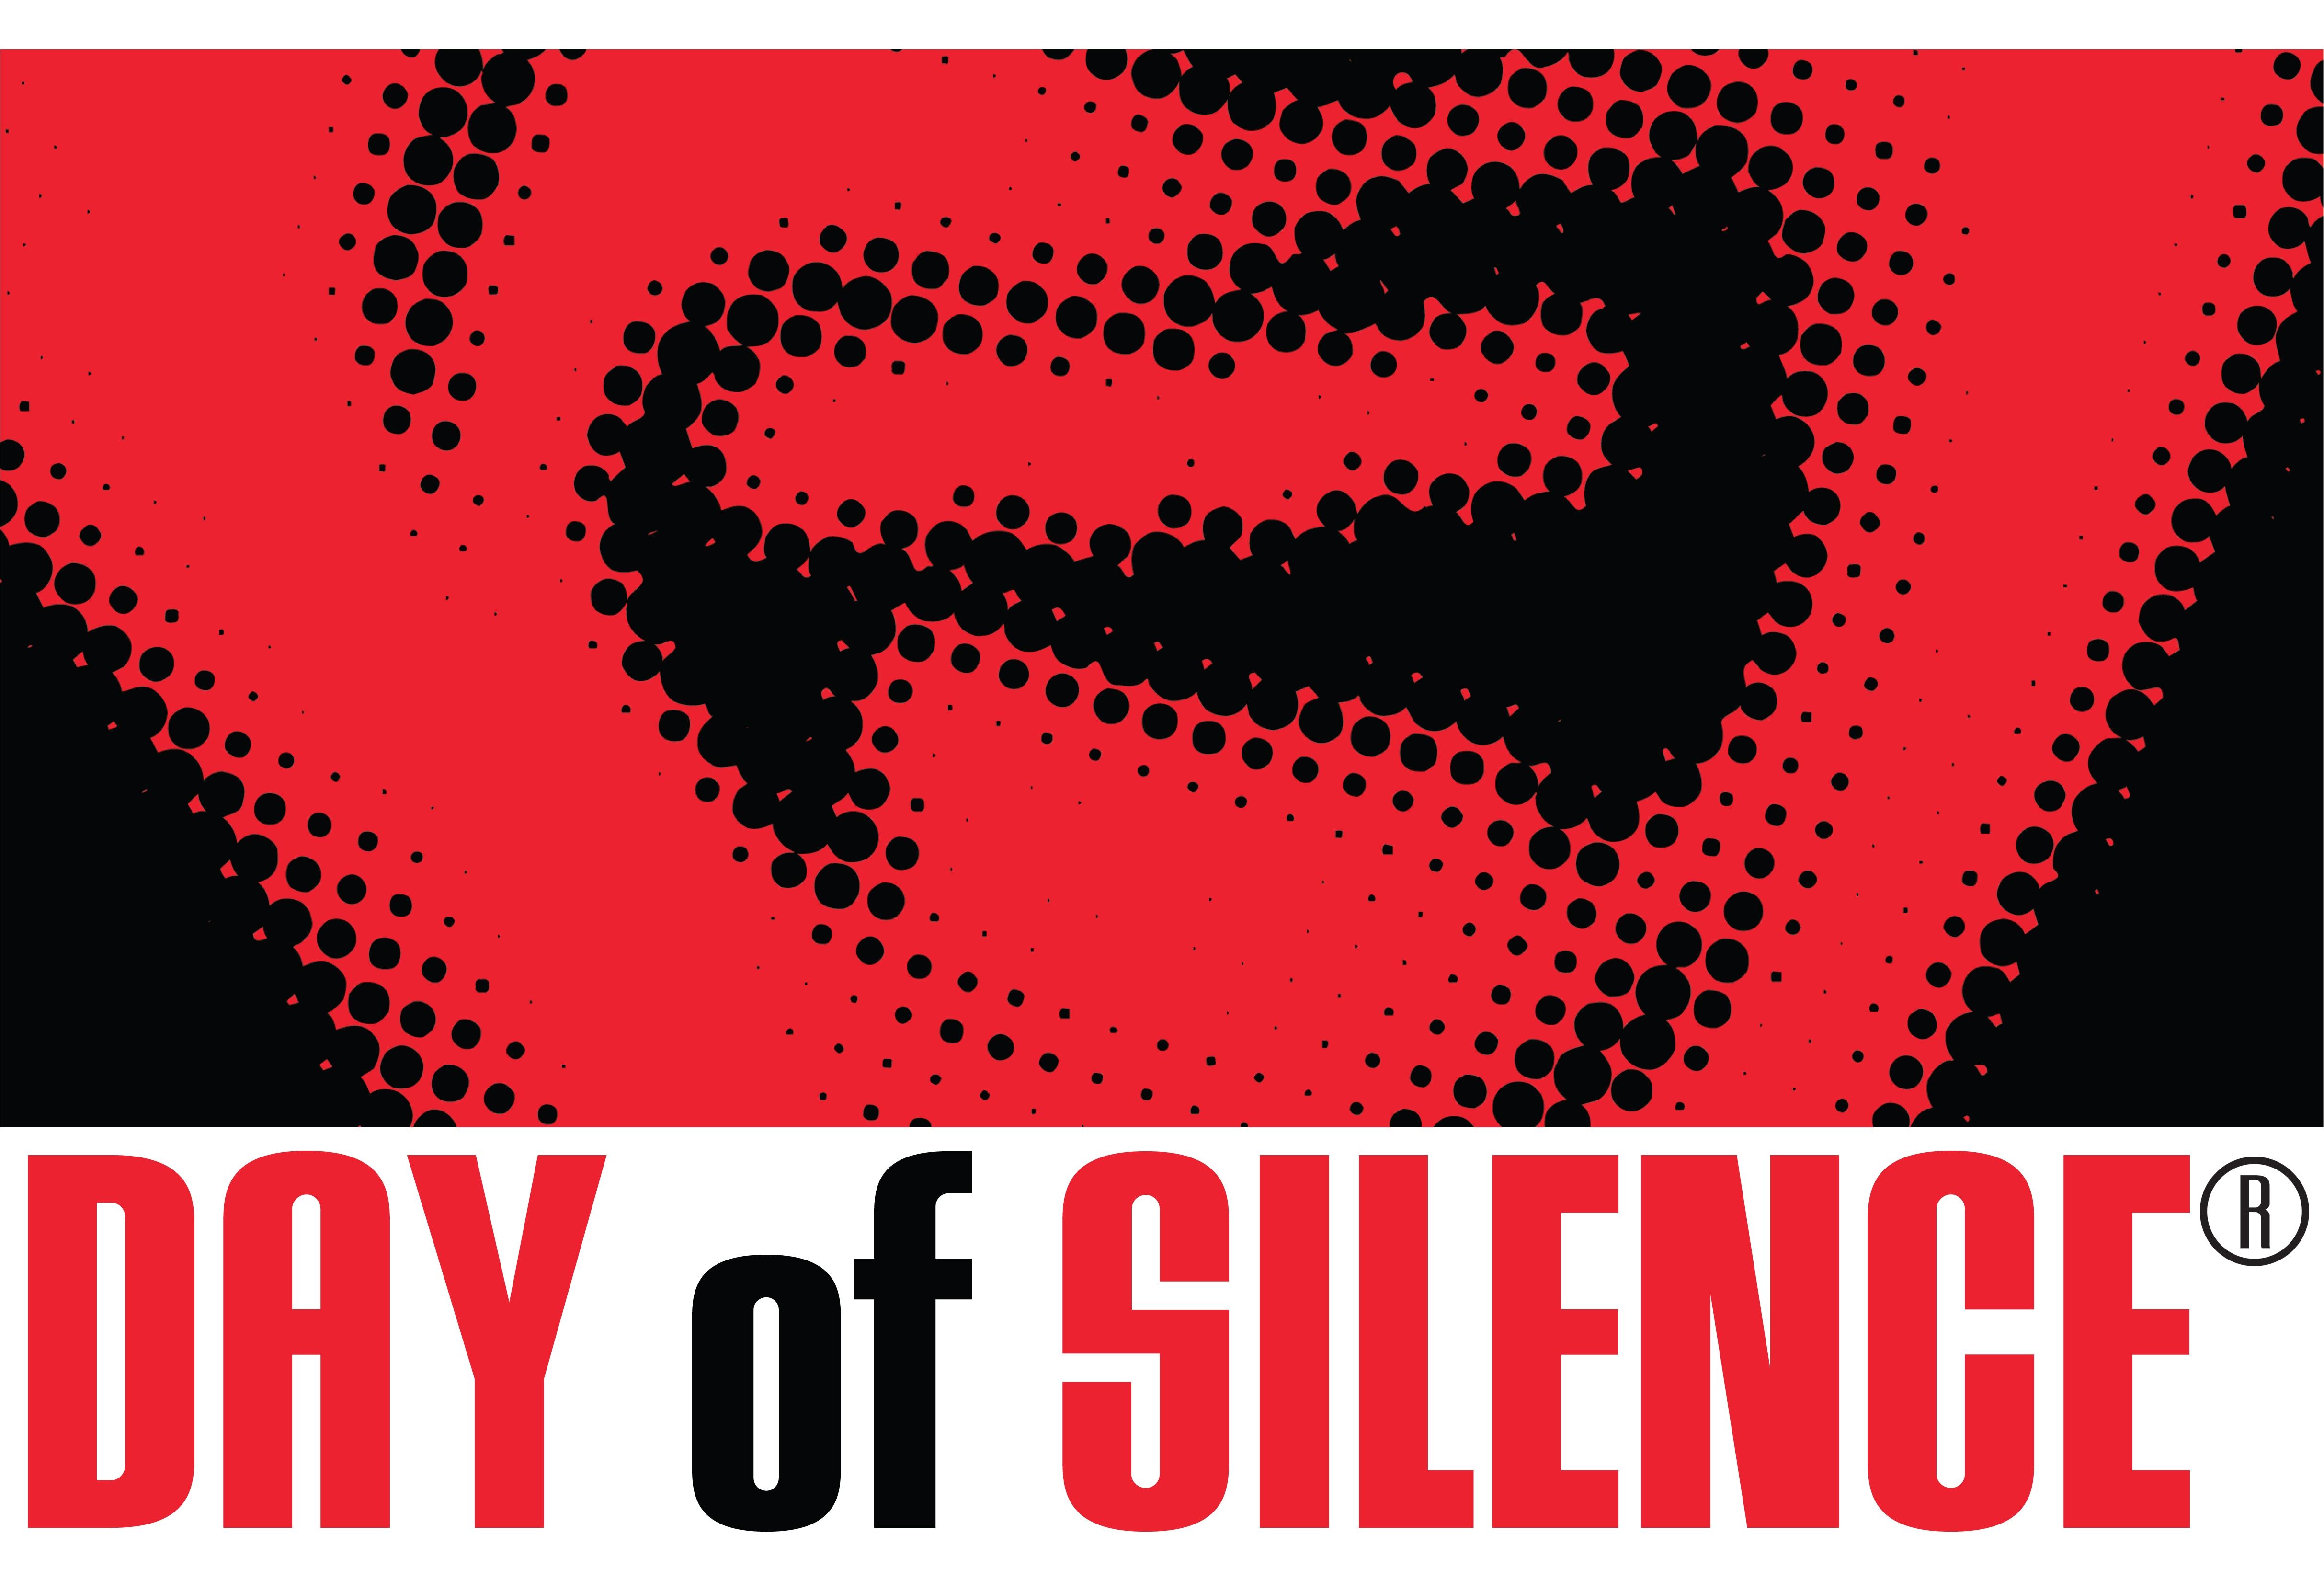 Attention head. Day of Silence.